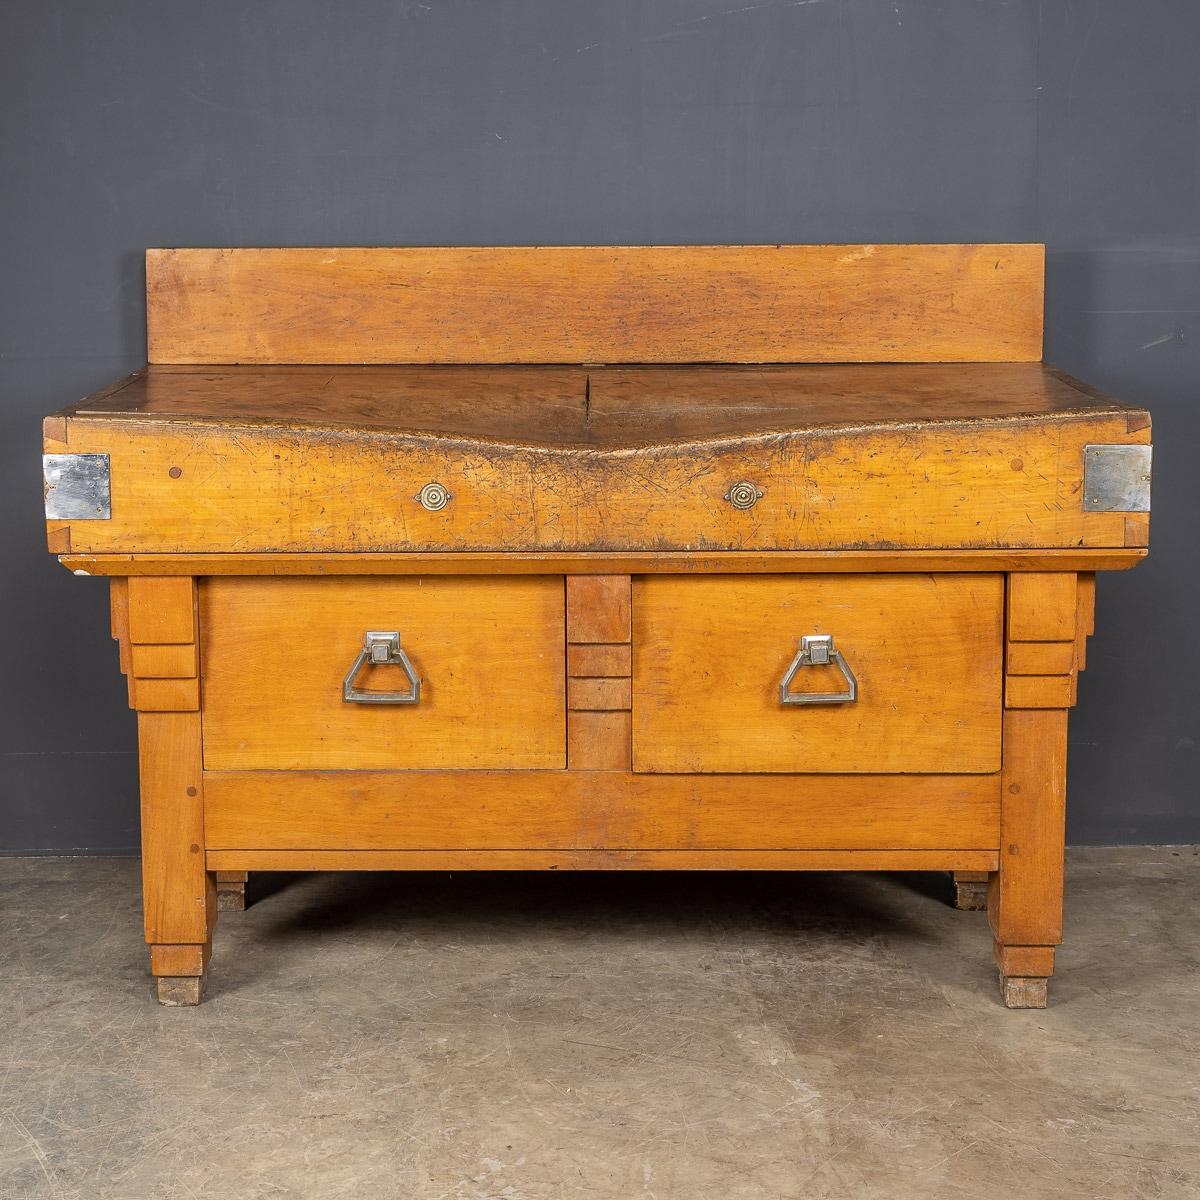 Antique early-20th Century French Art Deco butchers block with all the grace and symmetry of the 1920's. Made from Hornbeam a strong fair hardwood used particularly for chopping blocks and boards although ironically the leaves of the Hornbeam can be